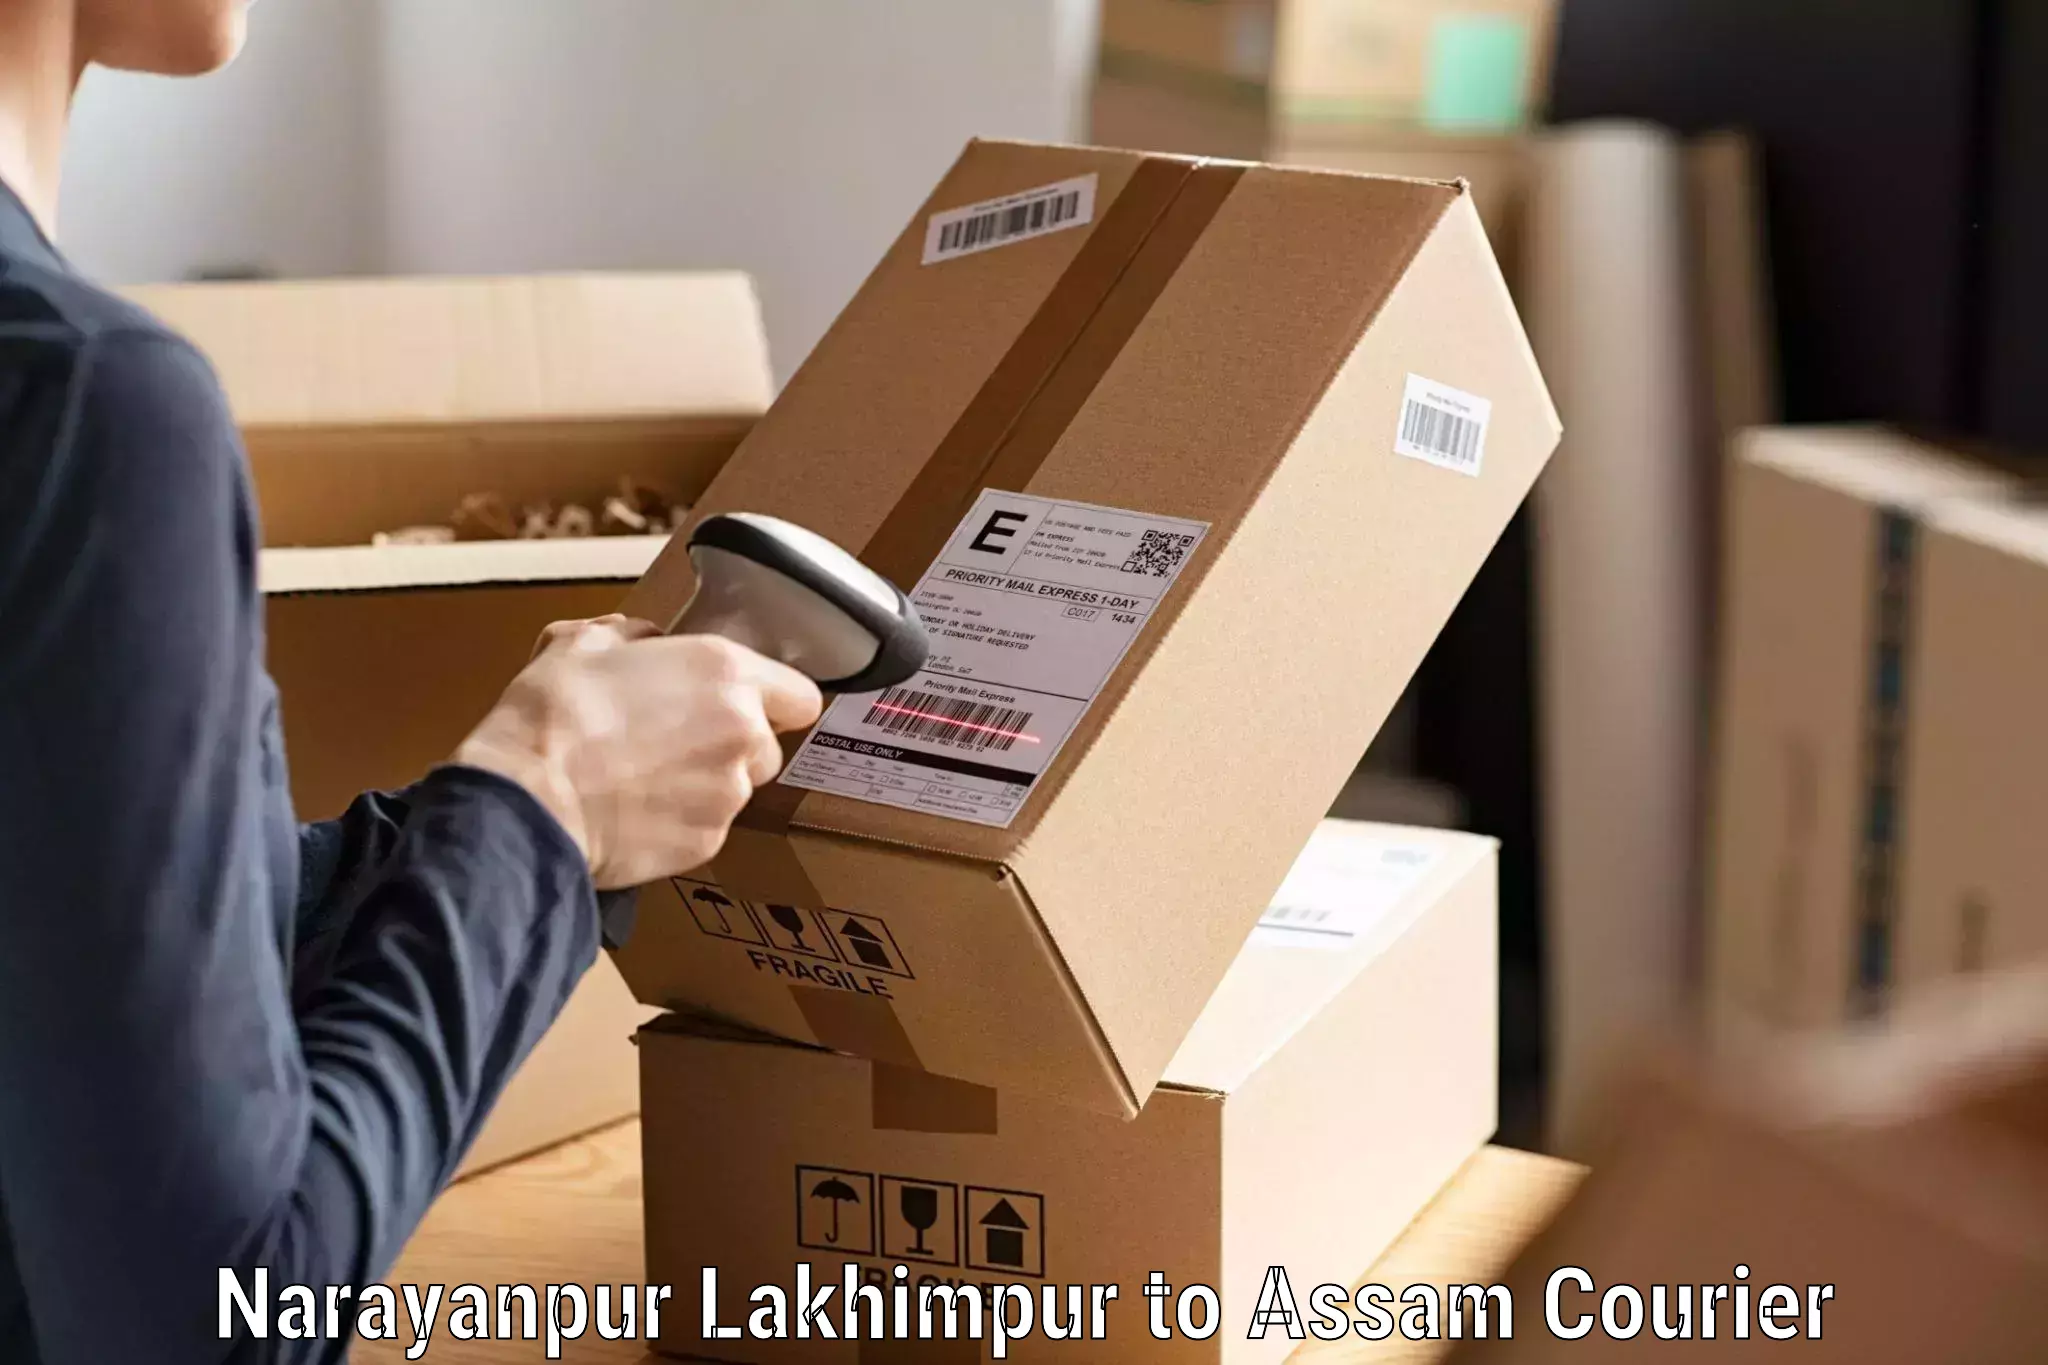 Advanced delivery solutions Narayanpur Lakhimpur to Rupai Siding